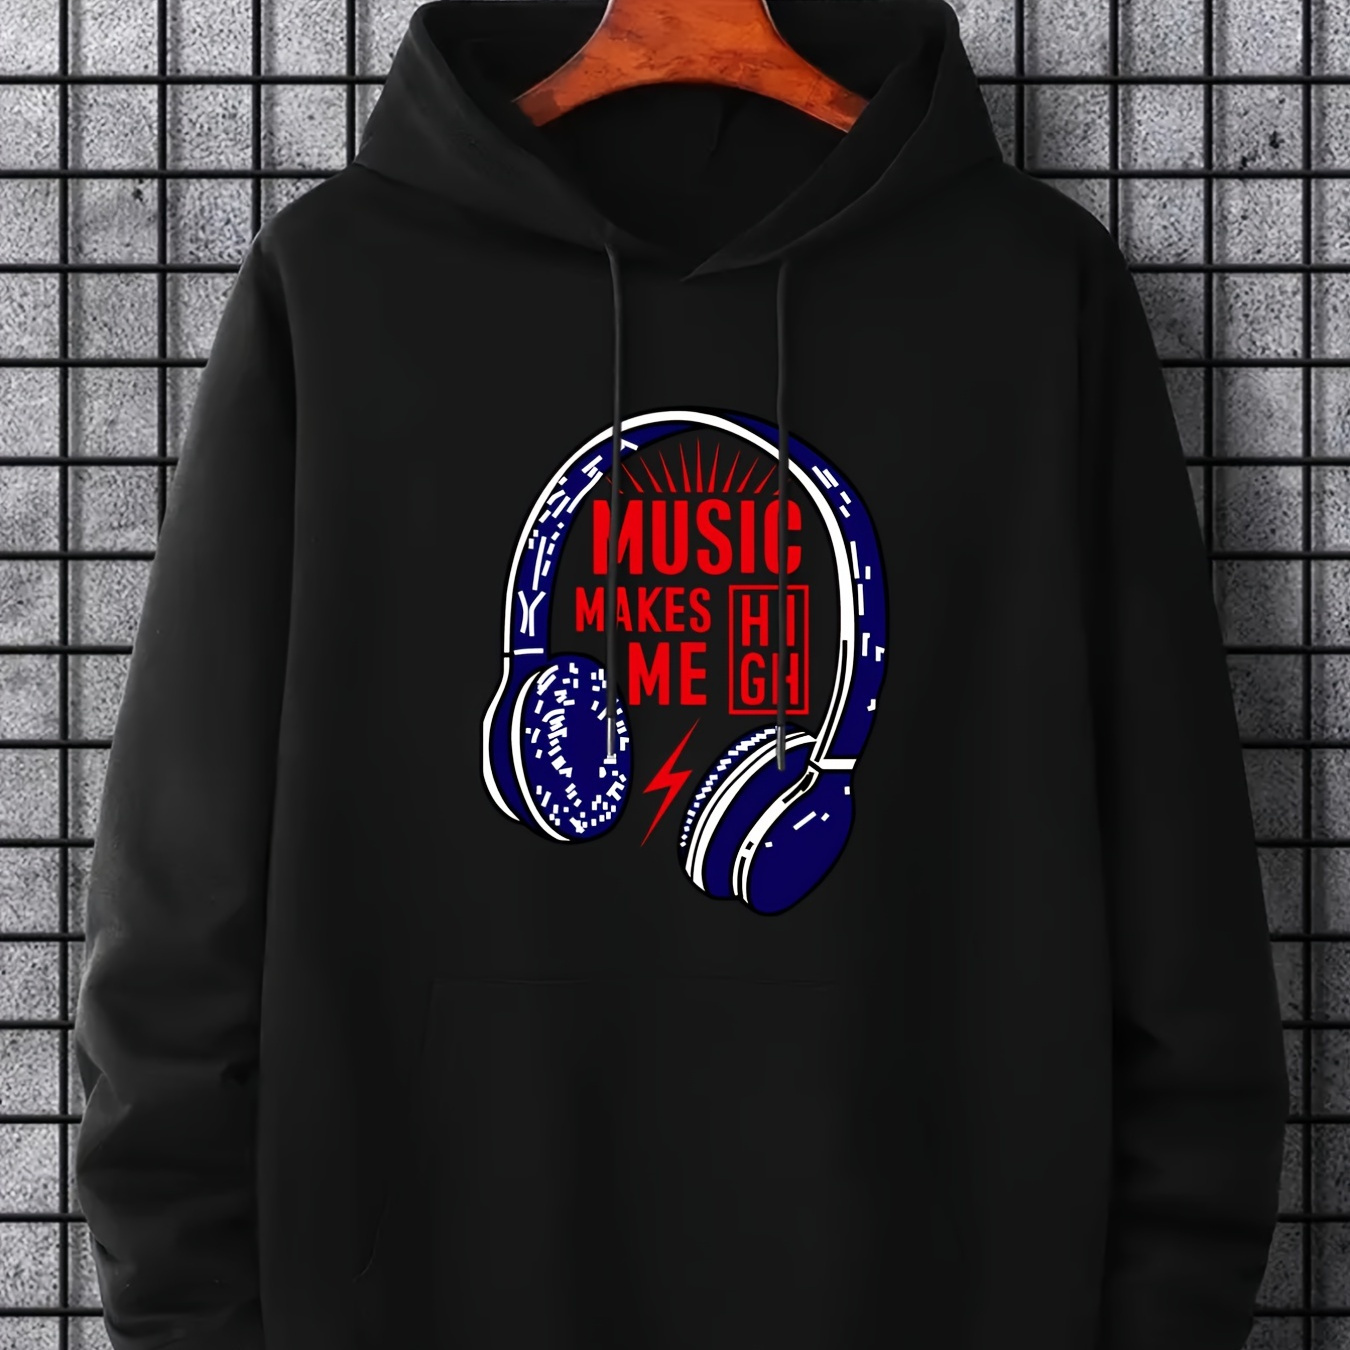 

Music Makes Me High Print Hoodie, Cool Hoodies For Men, Men's Casual Graphic Design Pullover Hooded Sweatshirt With Kangaroo Pocket Streetwear For Winter Fall, As Gifts